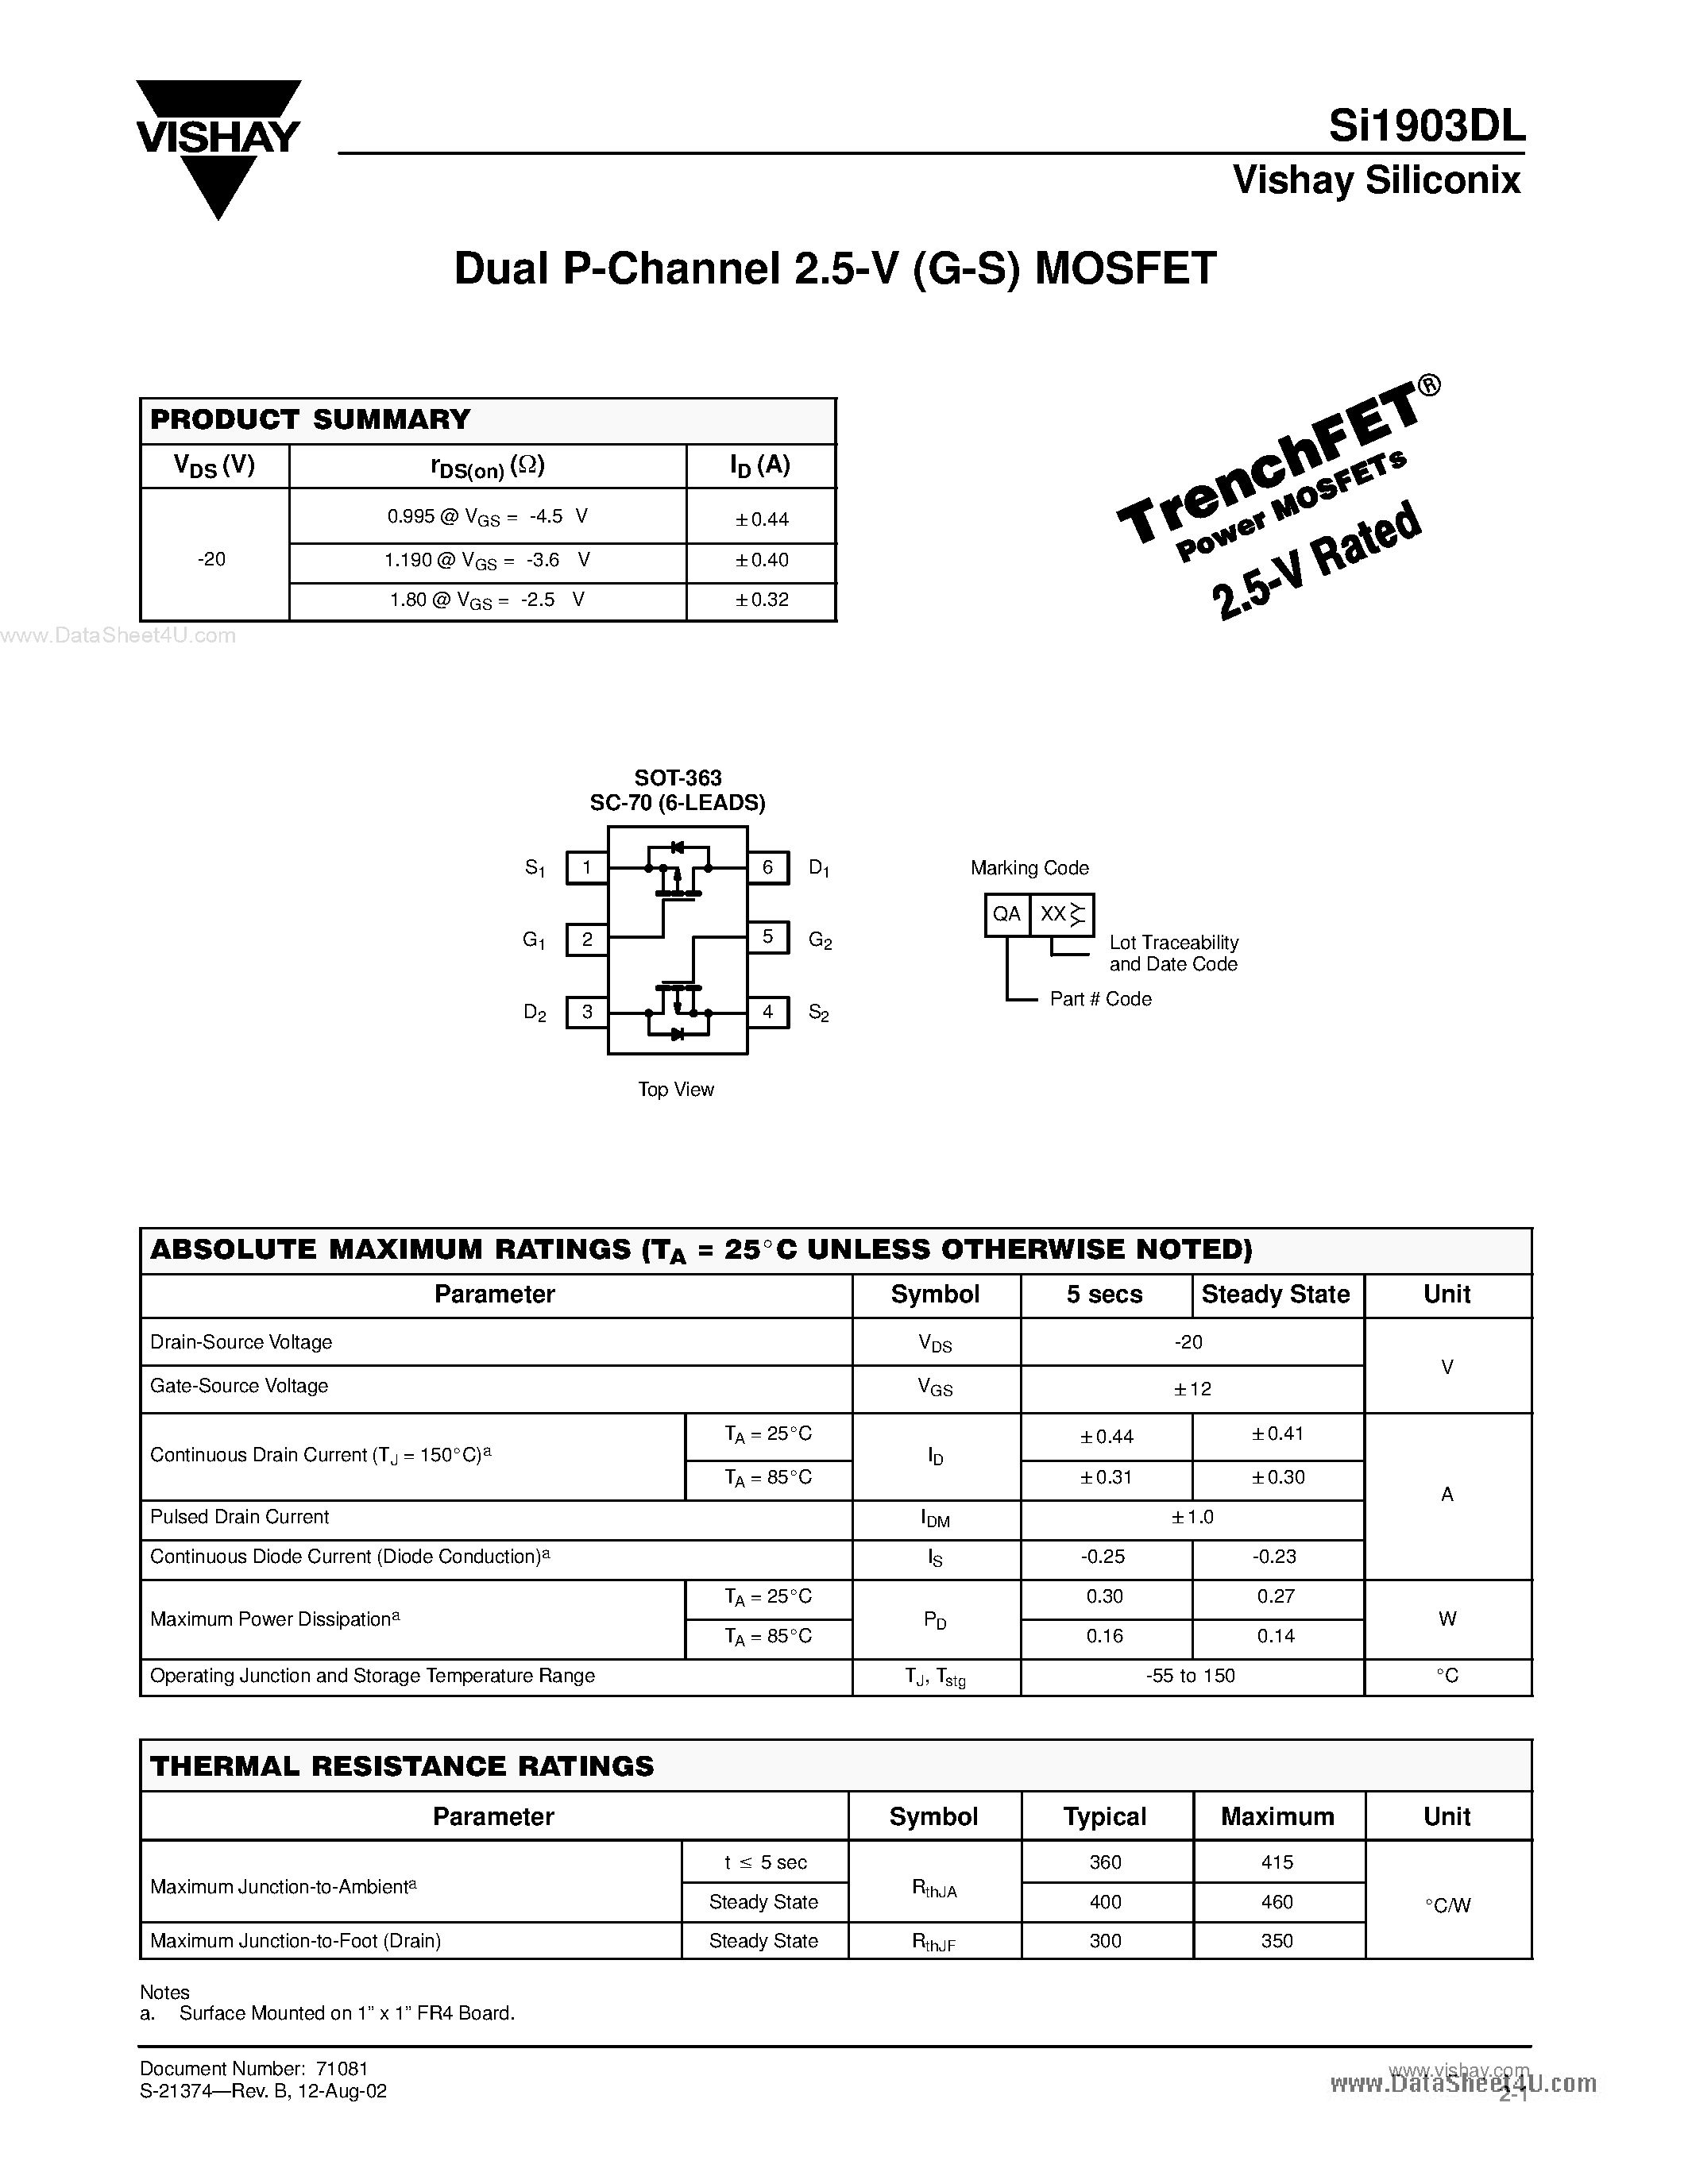 Datasheet SI1903DL - Dual P-Channel 2.5-V (G-S) MOSFET page 1